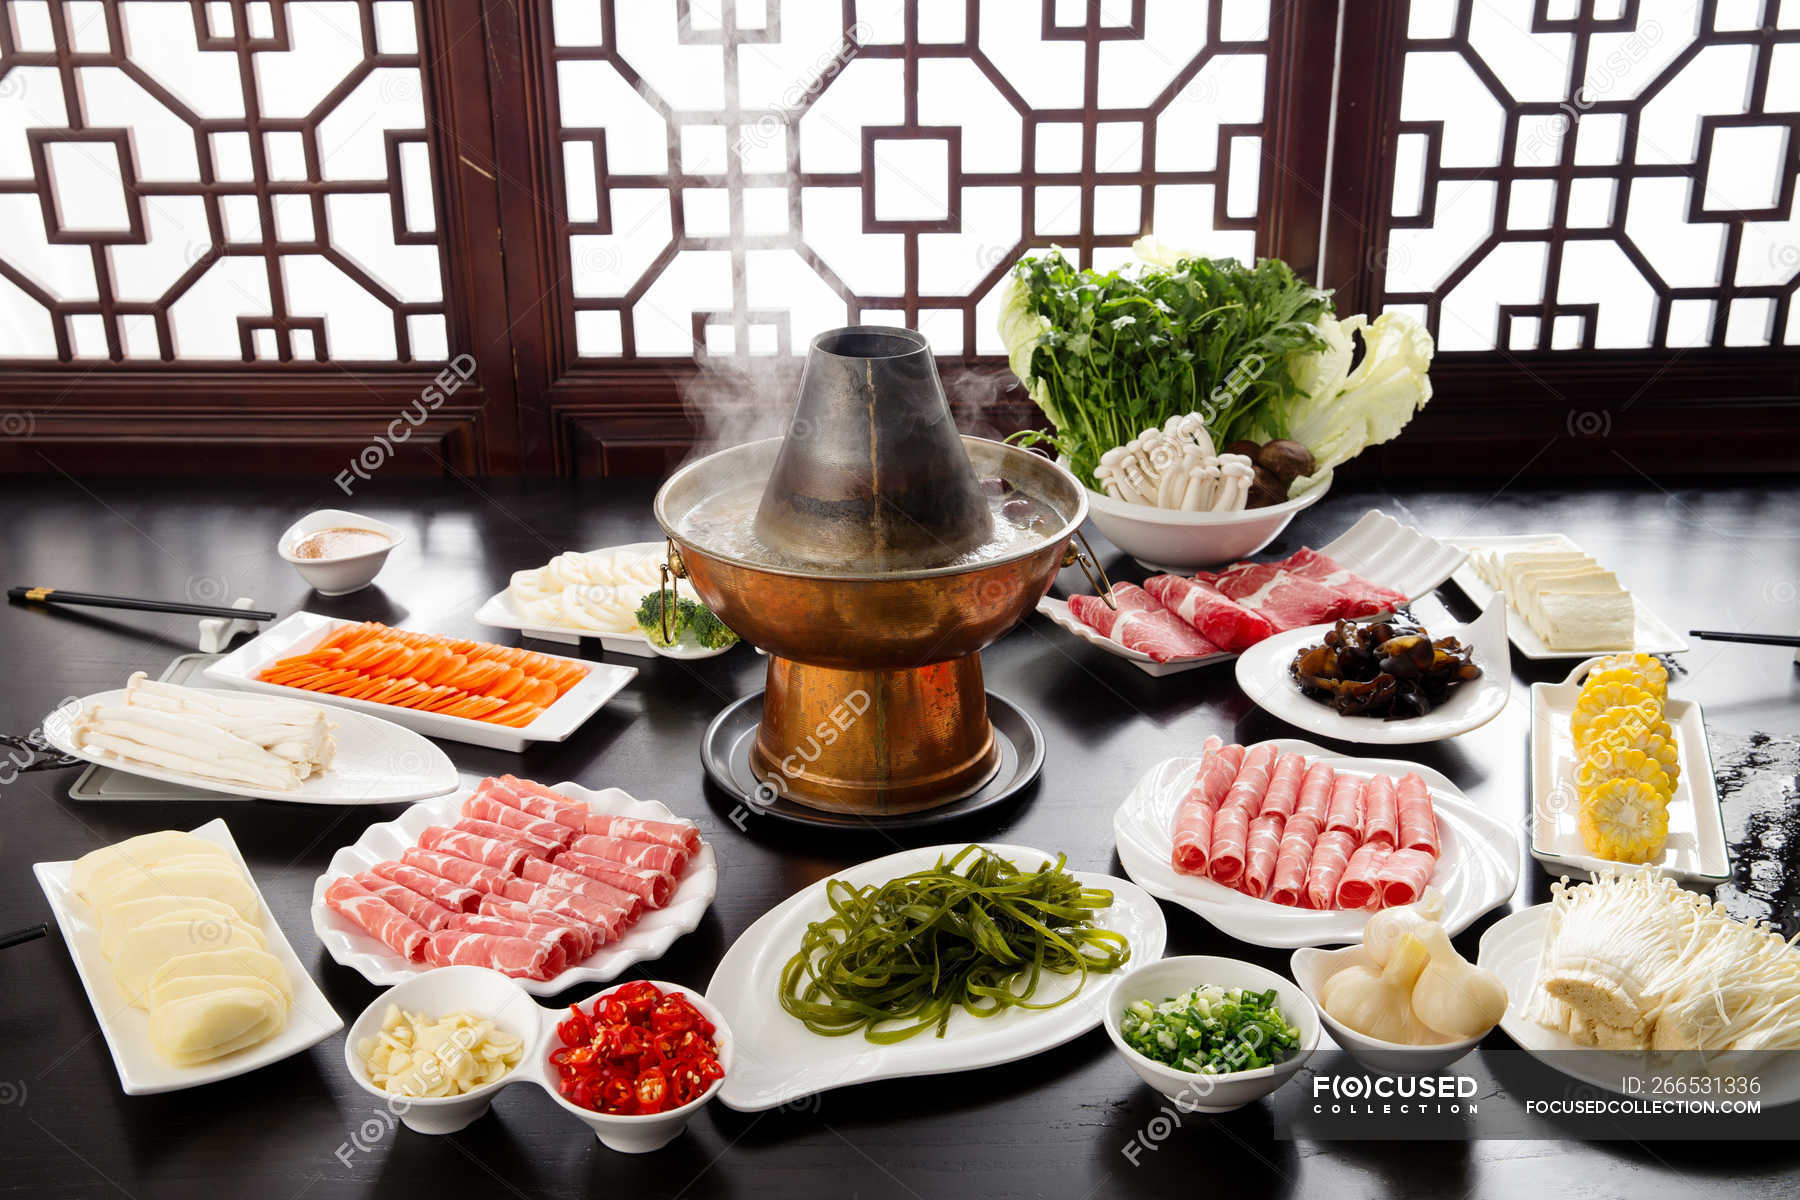 antenna impact Ringlet Copper hot pot with meat and vegetables on table, chafing dish concept —  East Asian Culture, red meat - Stock Photo | #266531336